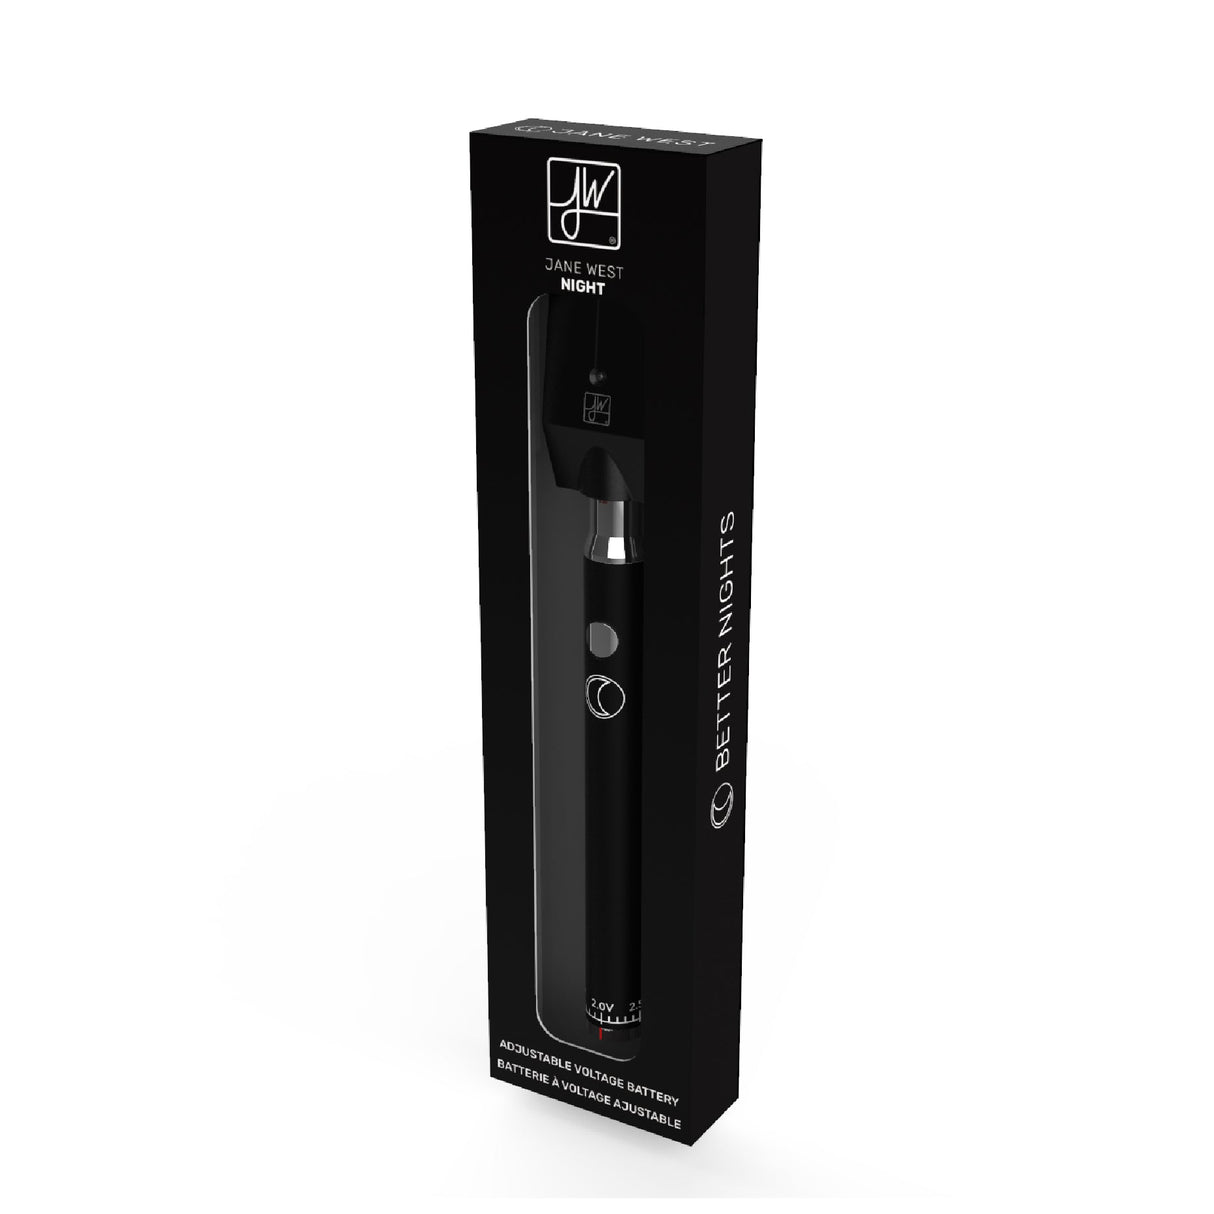 Jane West Night Black 510 Thread Battery, compact design, 650mAh, side view with packaging